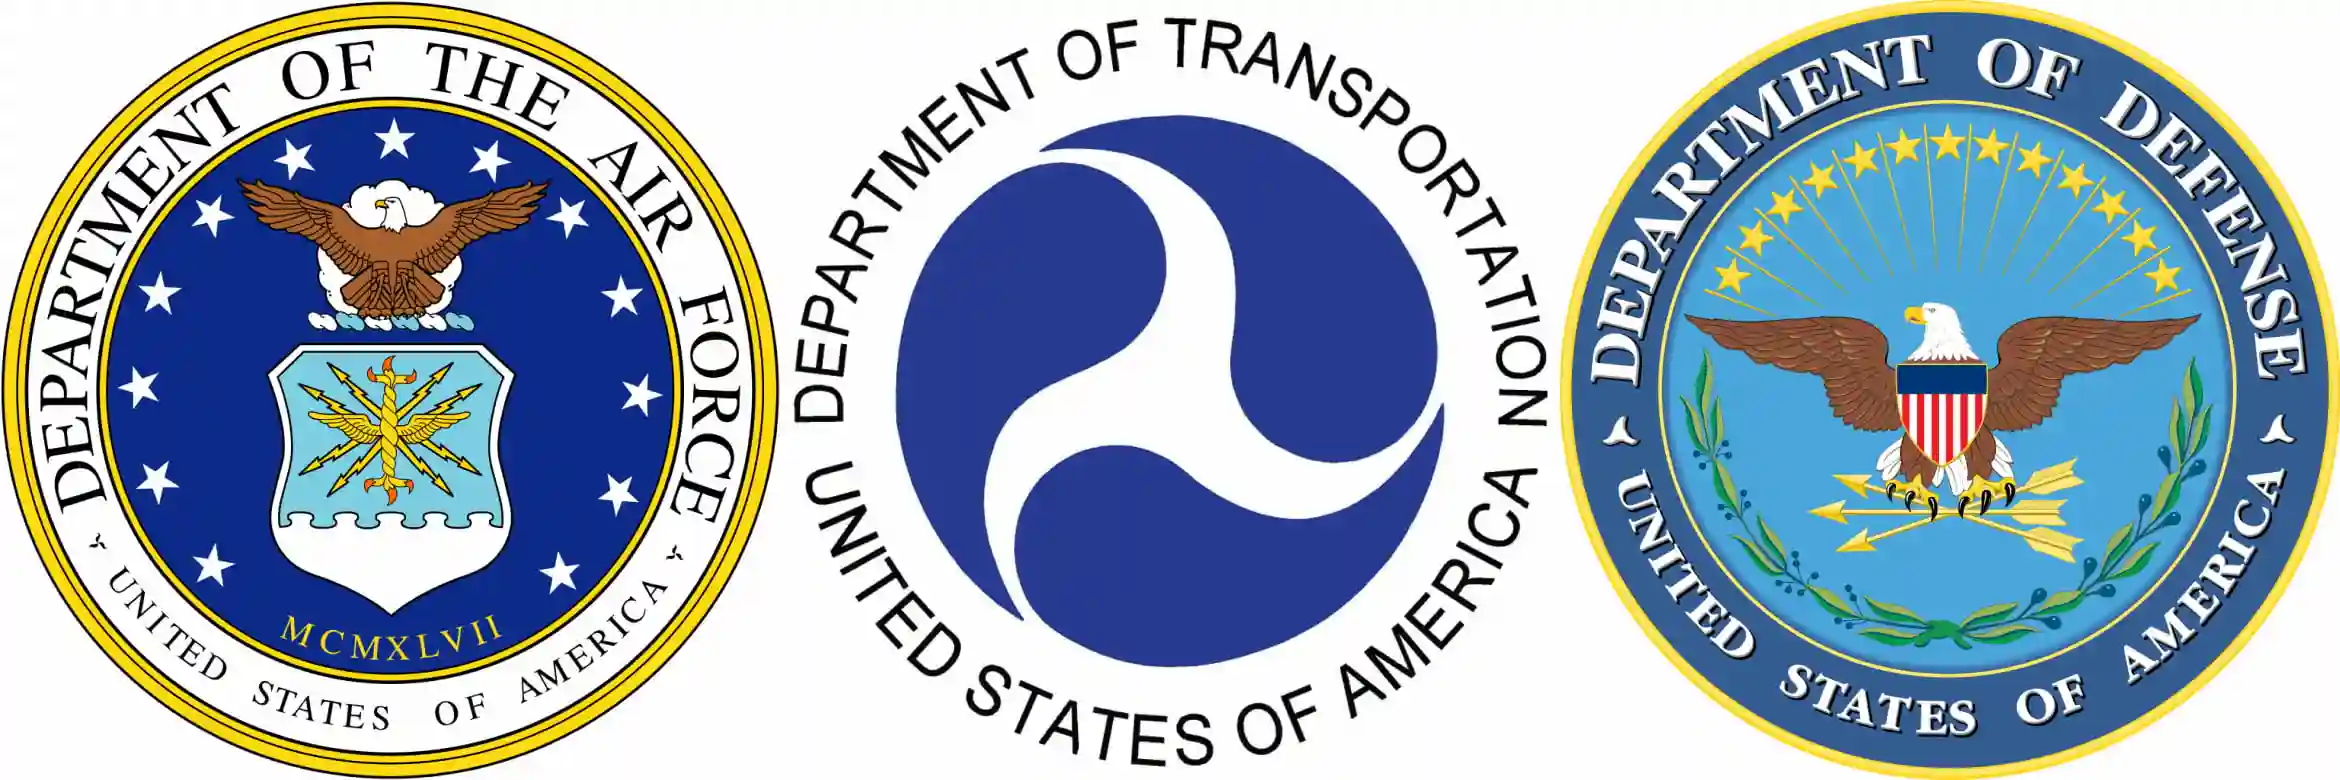 The logos for the United States' Departments of the Air Force, Transporation, and Defense. 